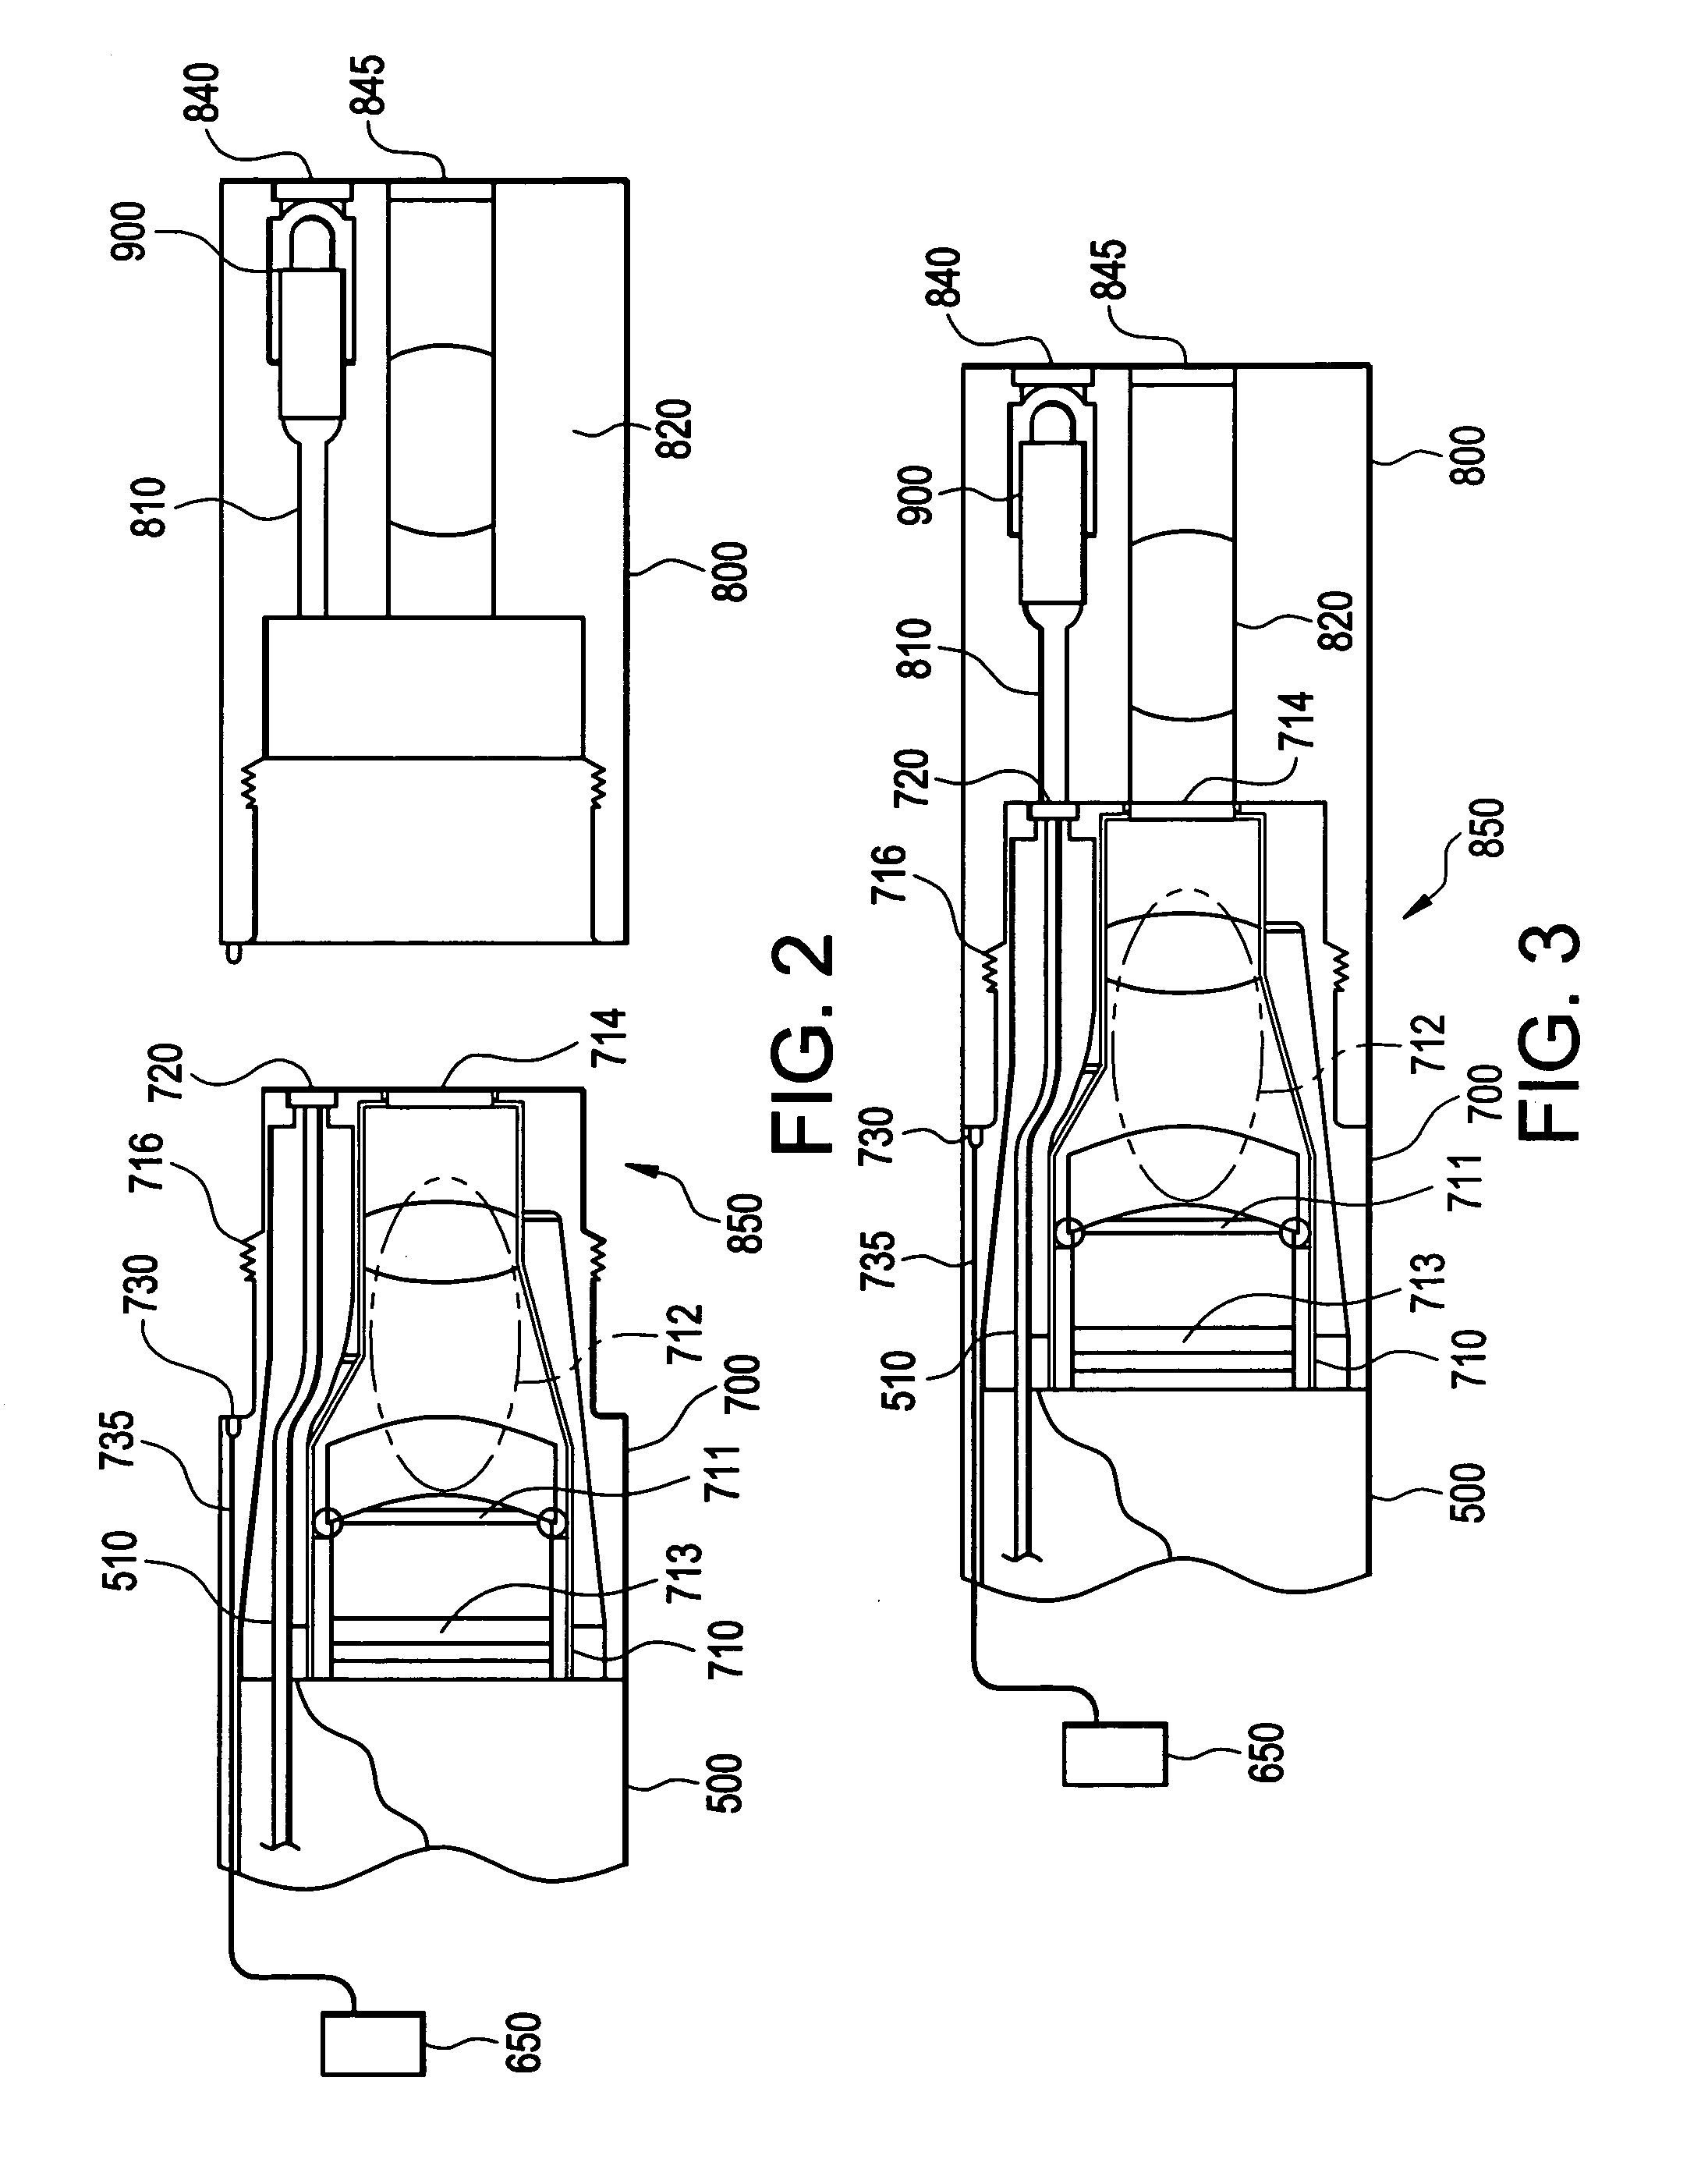 Light assembly for remote visual inspection apparatus